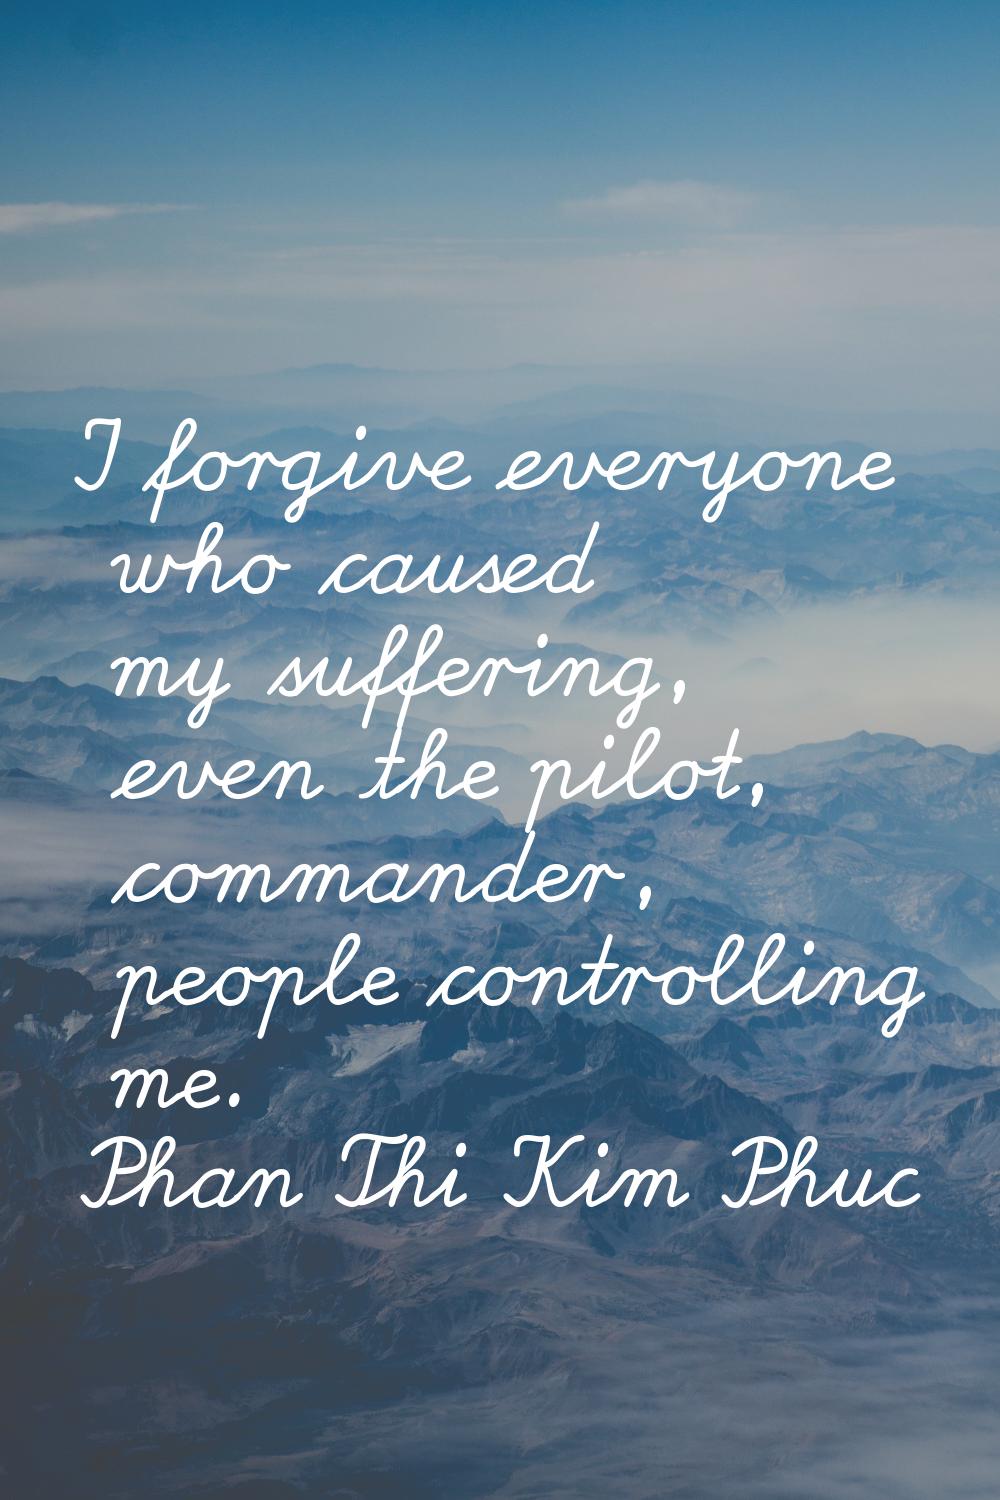 I forgive everyone who caused my suffering, even the pilot, commander, people controlling me.